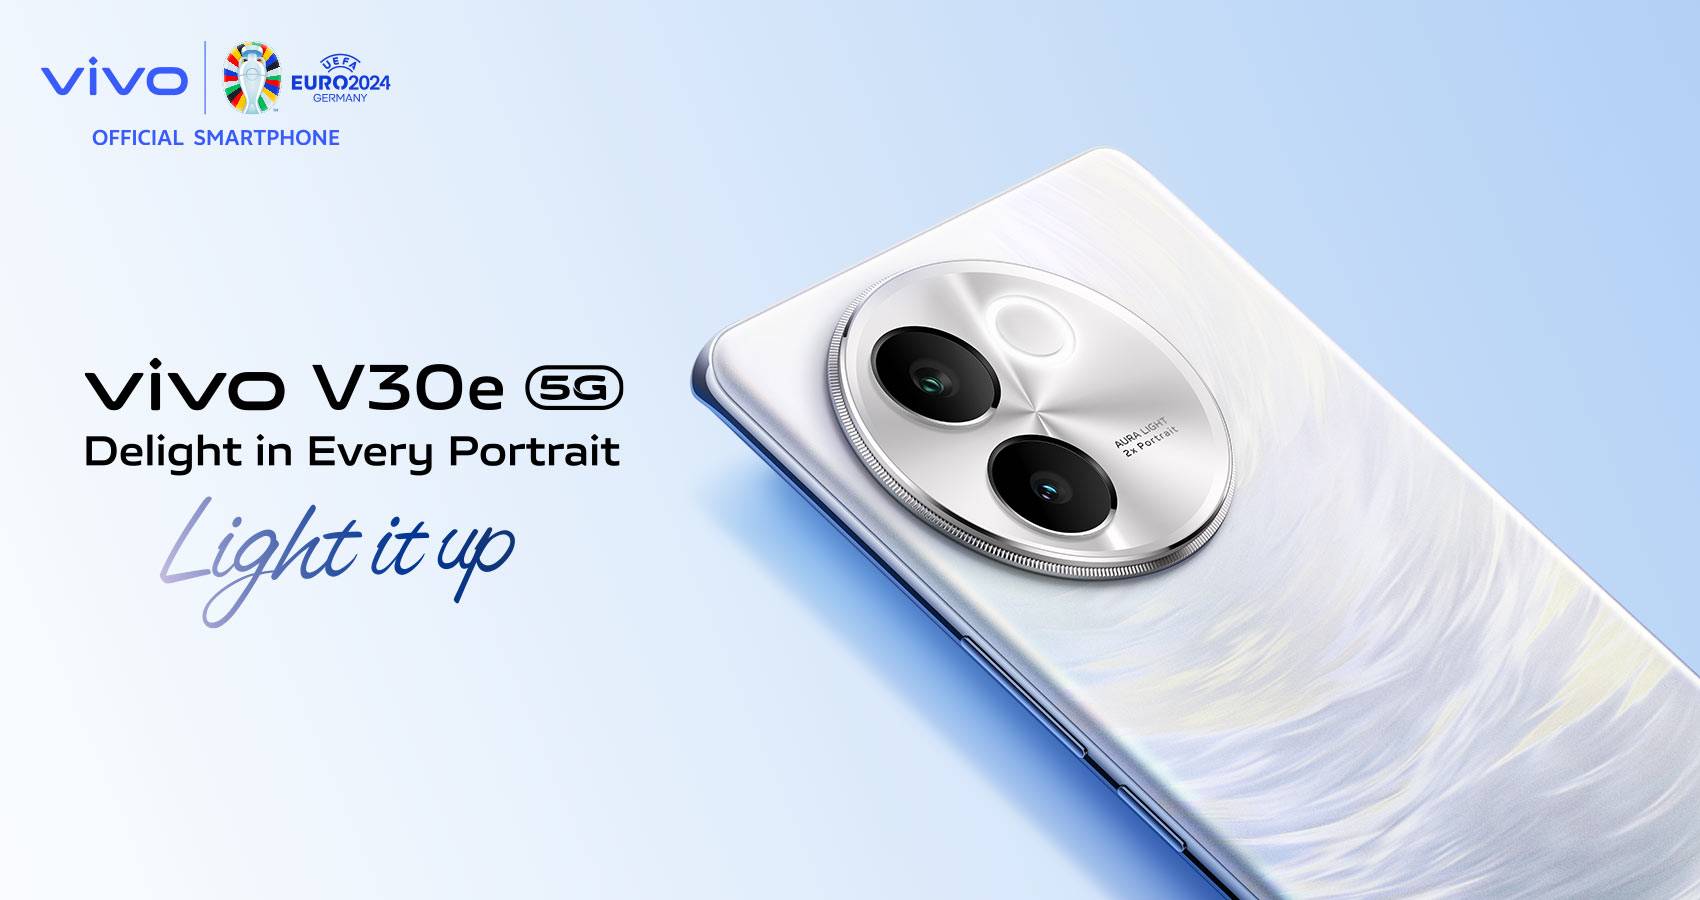 vivo V30e 5G Now Available in Stunning Dreamy White Color Variant